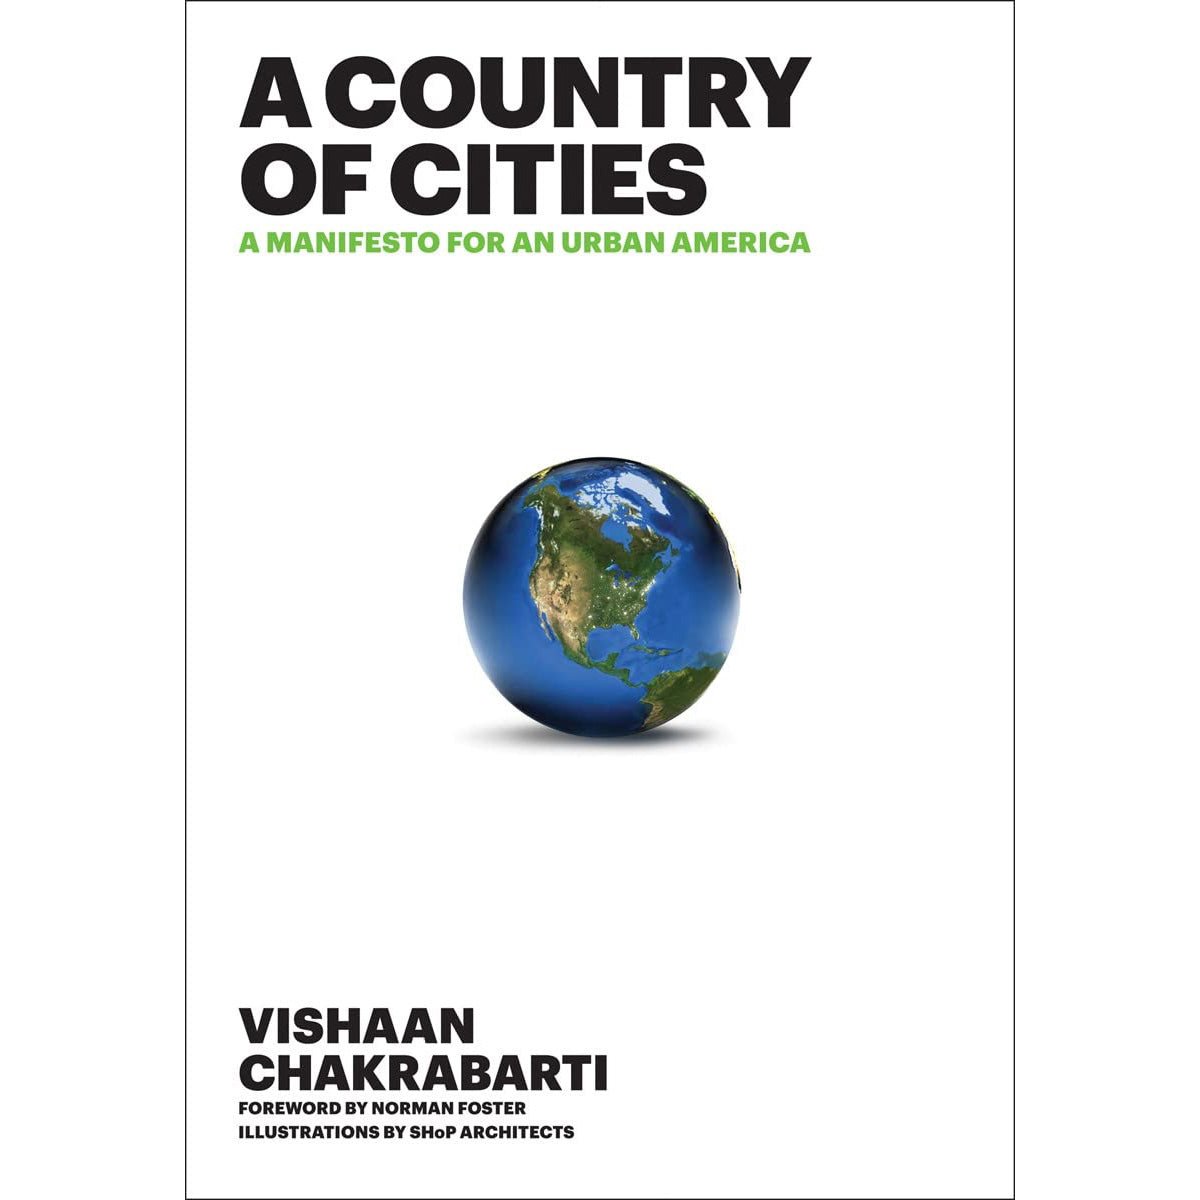 A Country of Cities: A Manifesto for an Urban America - Destination PSP